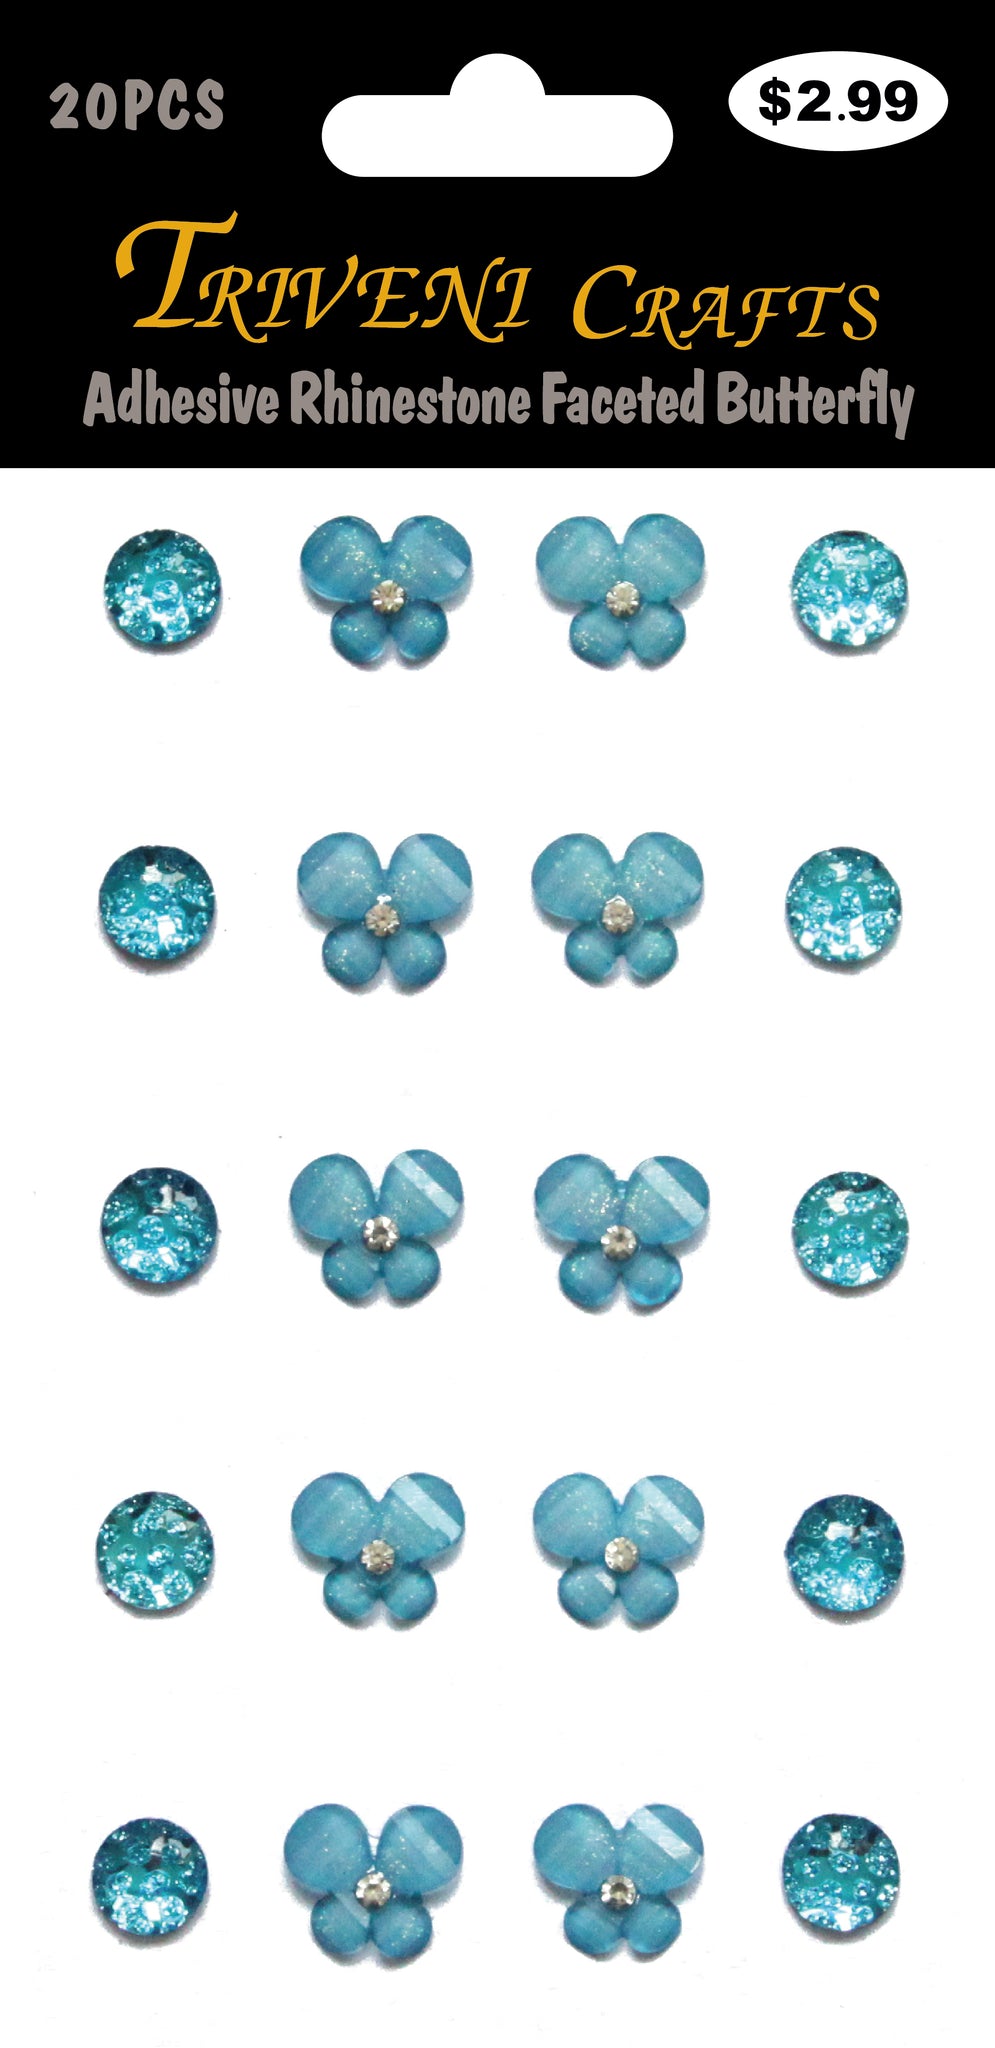 Adhesive Rhinestone Faceted Butterfly - Turquoise